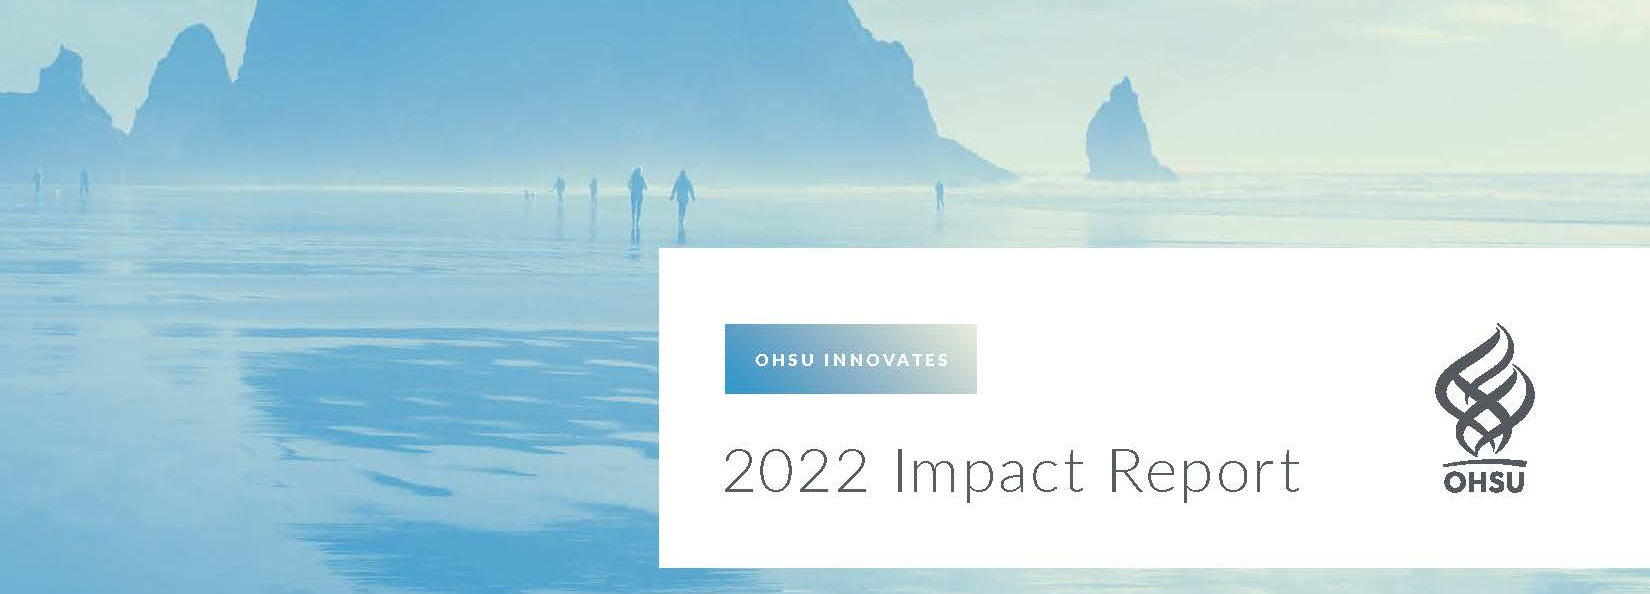 Image of cover page of 2022 Impact Report